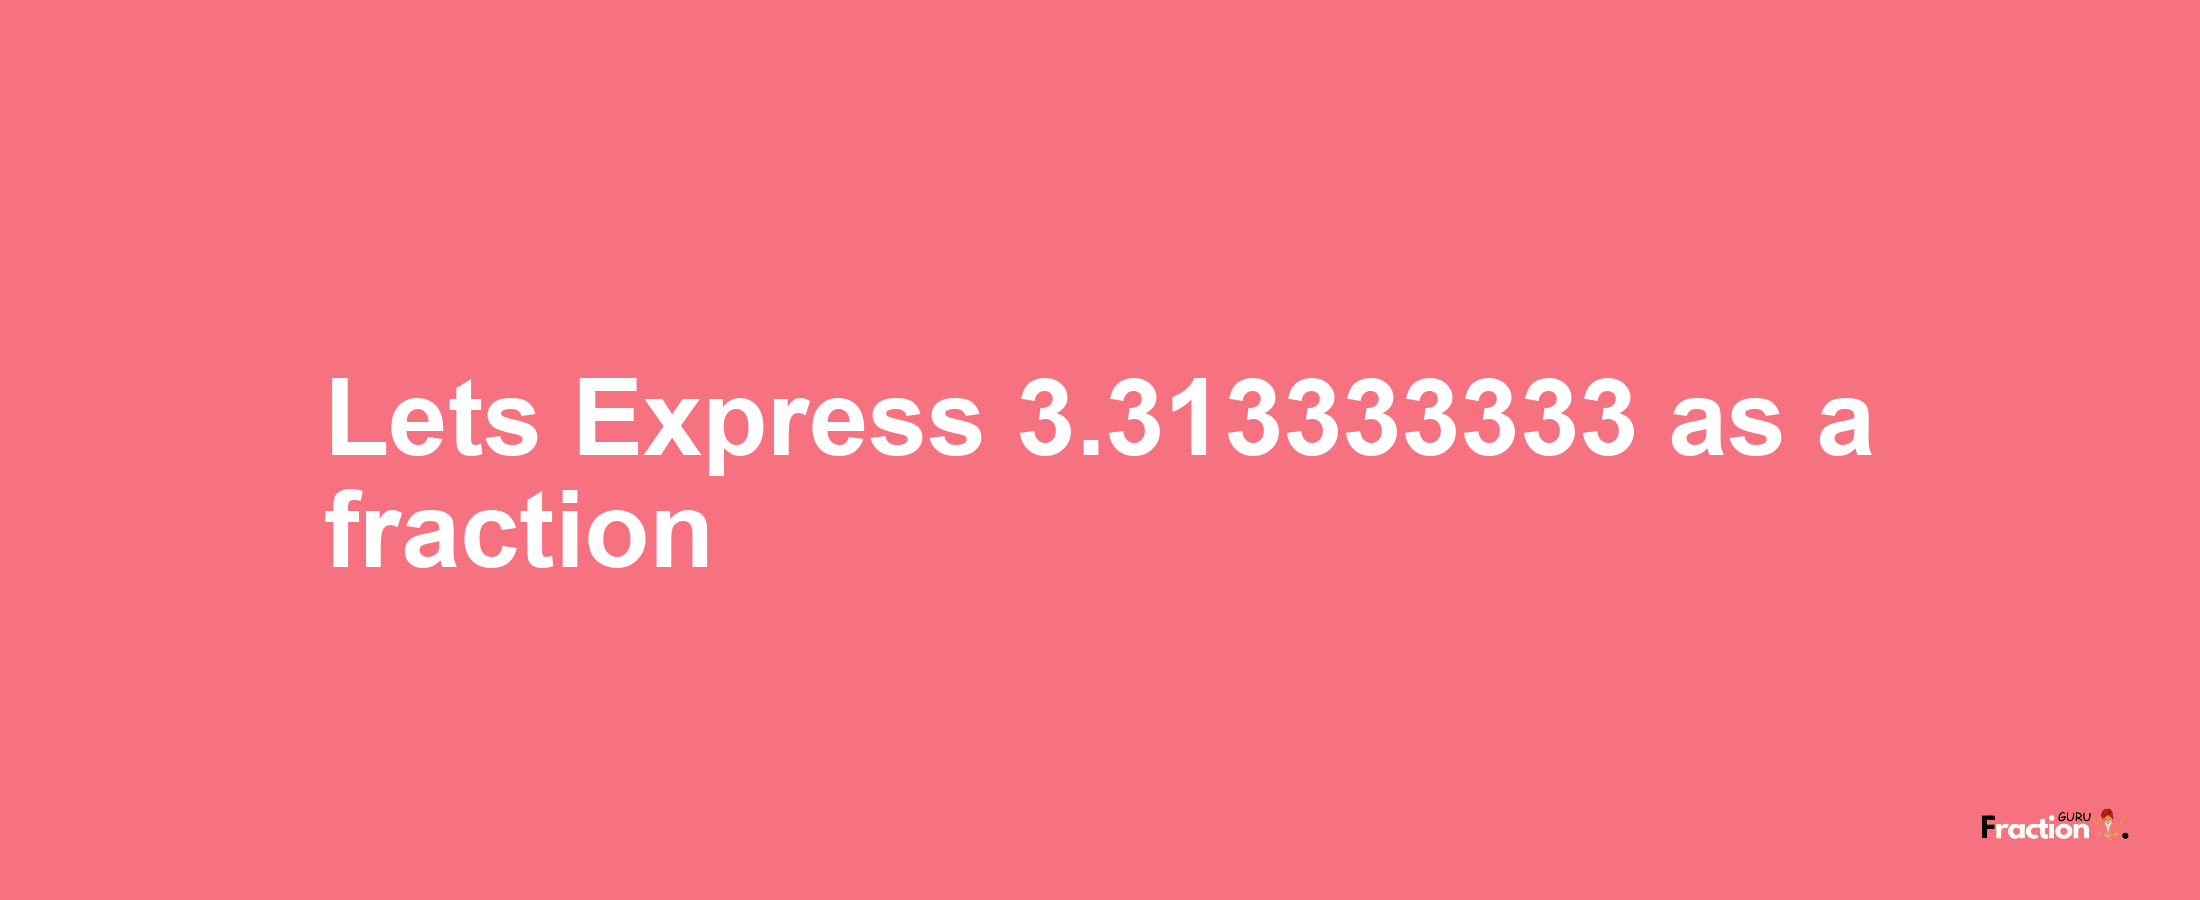 Lets Express 3.313333333 as afraction